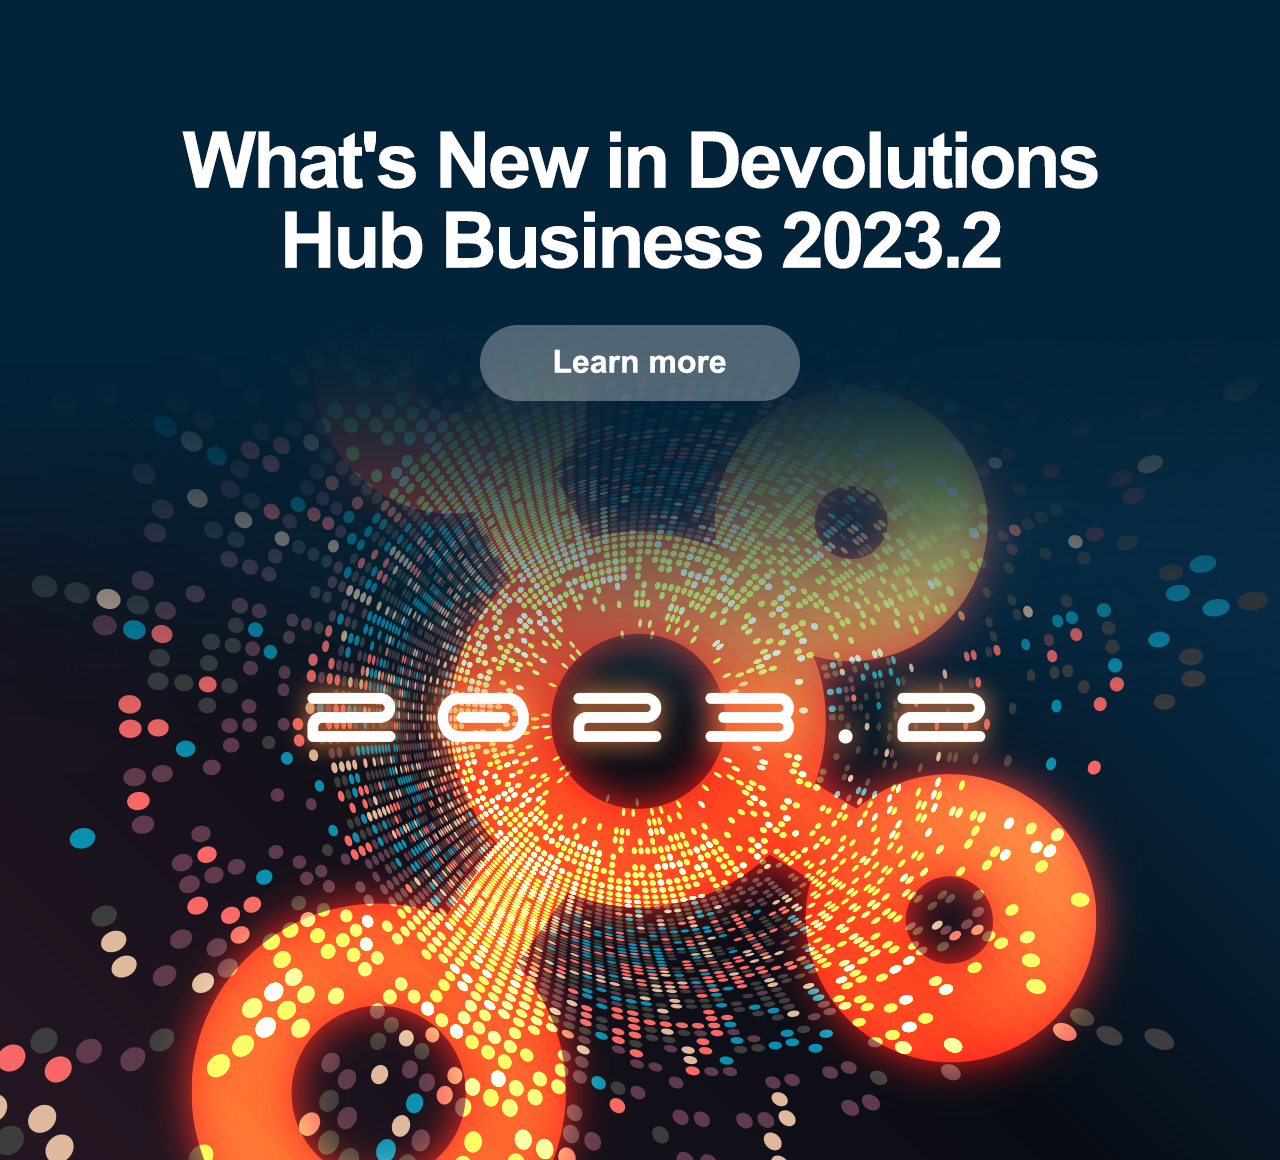 What's New in Devolutions Hub Business 2023.2